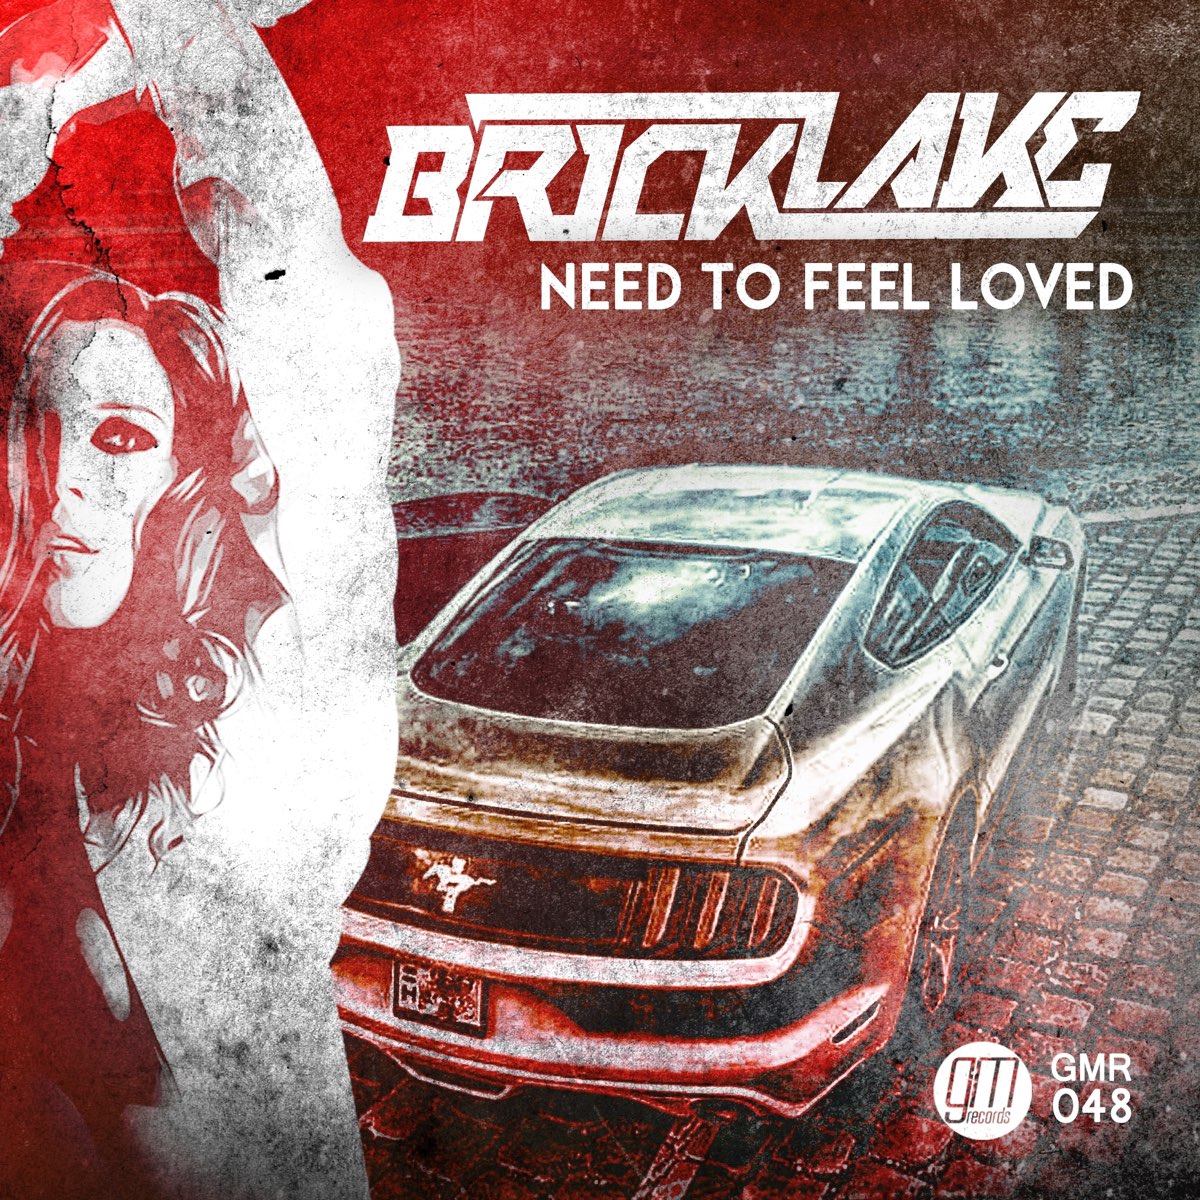 Need to feel loved feat delline bass. Need to feel Loved. Adam k Soha need to feel Loved. Reflekt need to feel Loved. Need to feel Loved Original Mix.